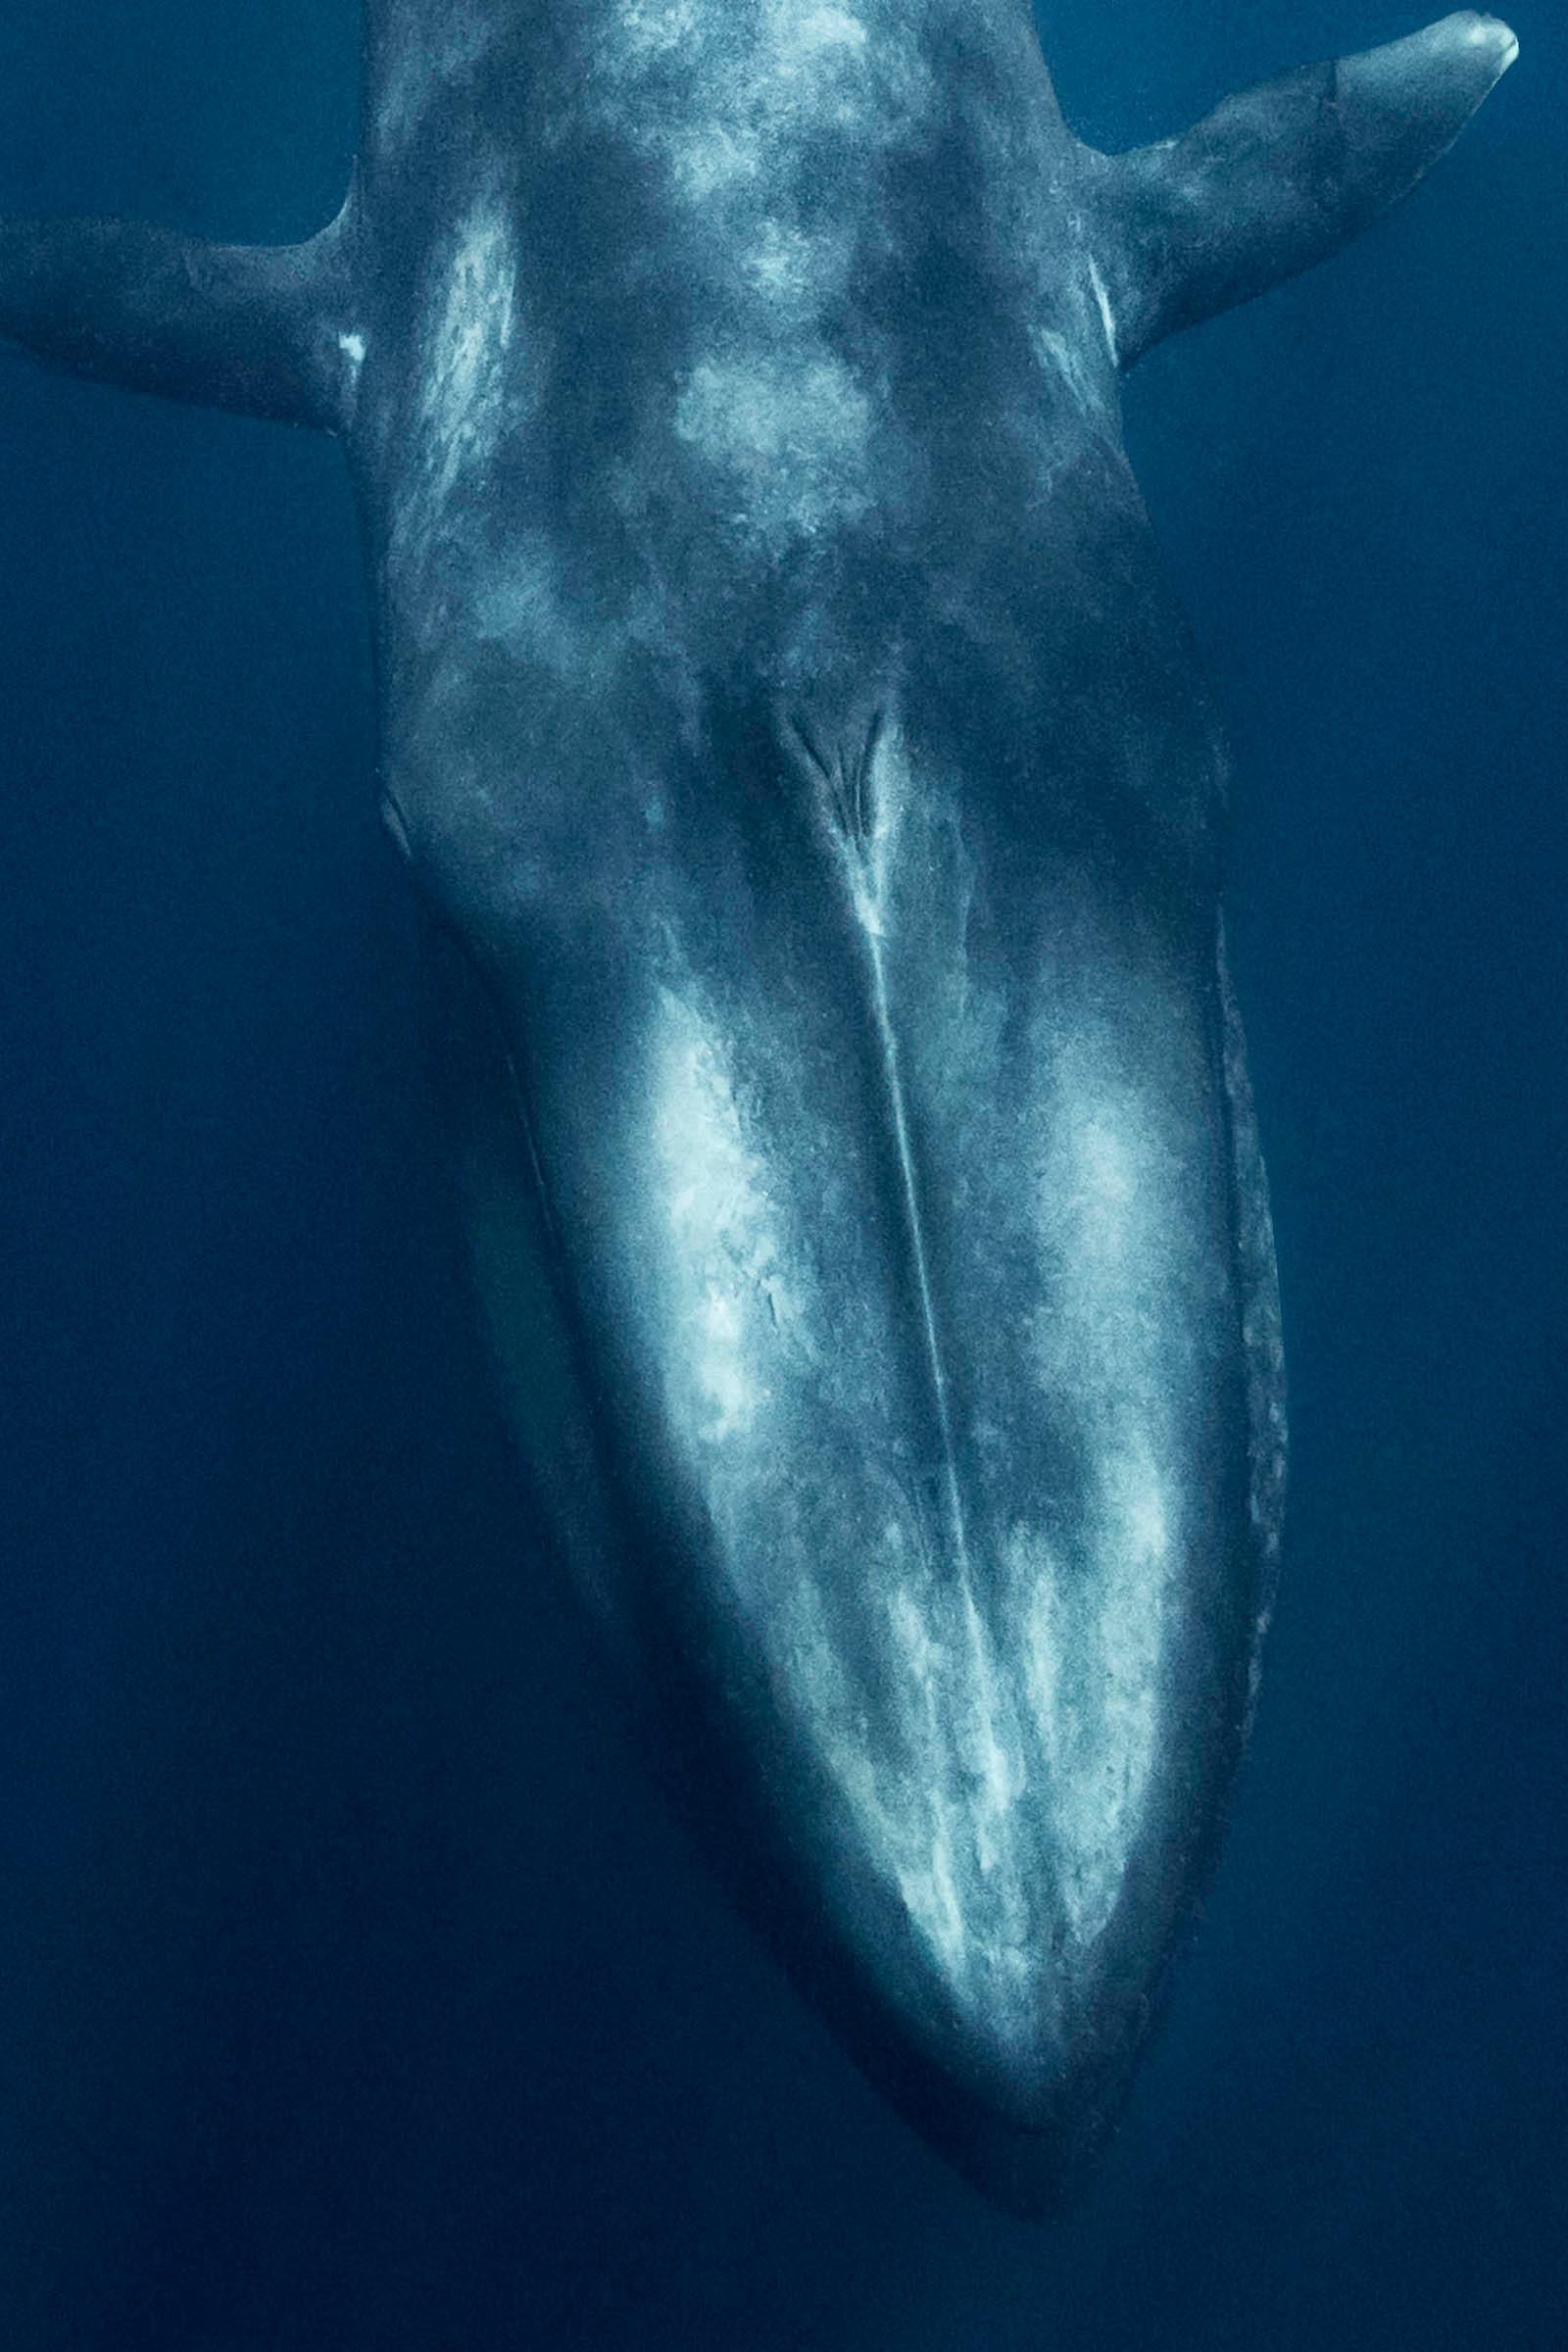 Dives Blue Whale - Signed limited nature fine art print, Color underwater photo - Photograph by Olivier Borde